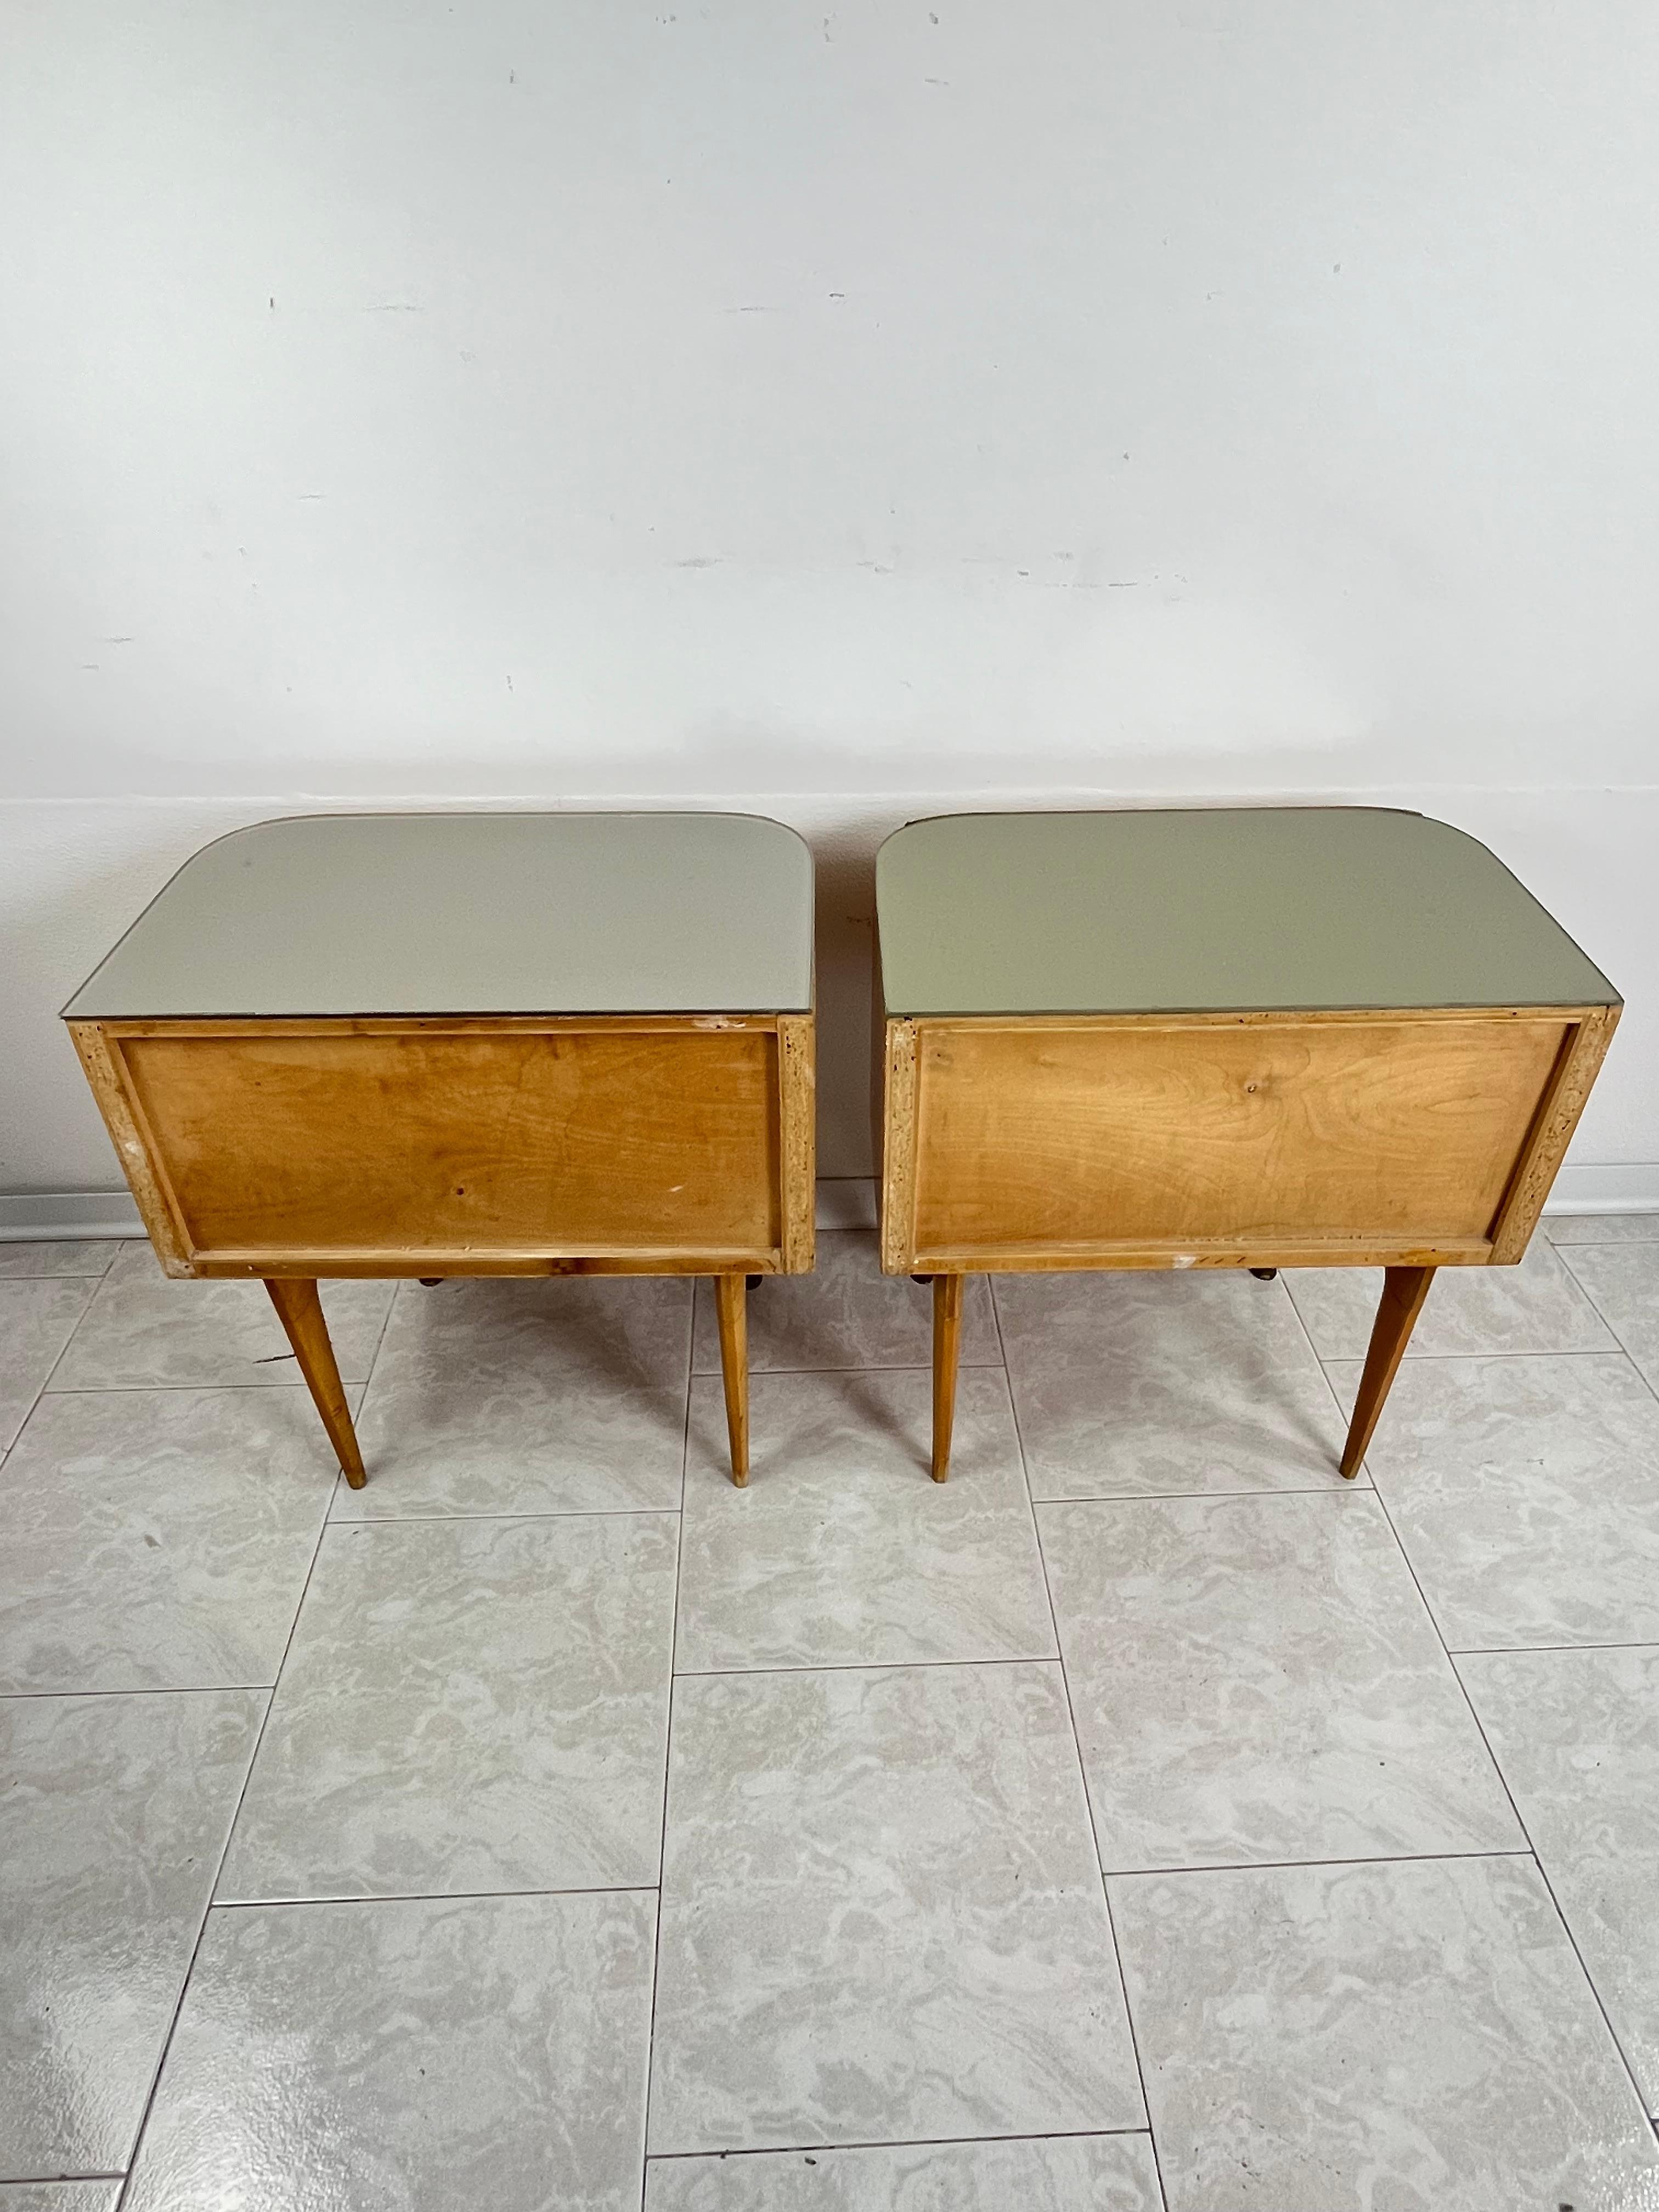 Set Of 2 Mid-Century Bedside Tables Attributed to Vittorio Dassi 1959 For Sale 2